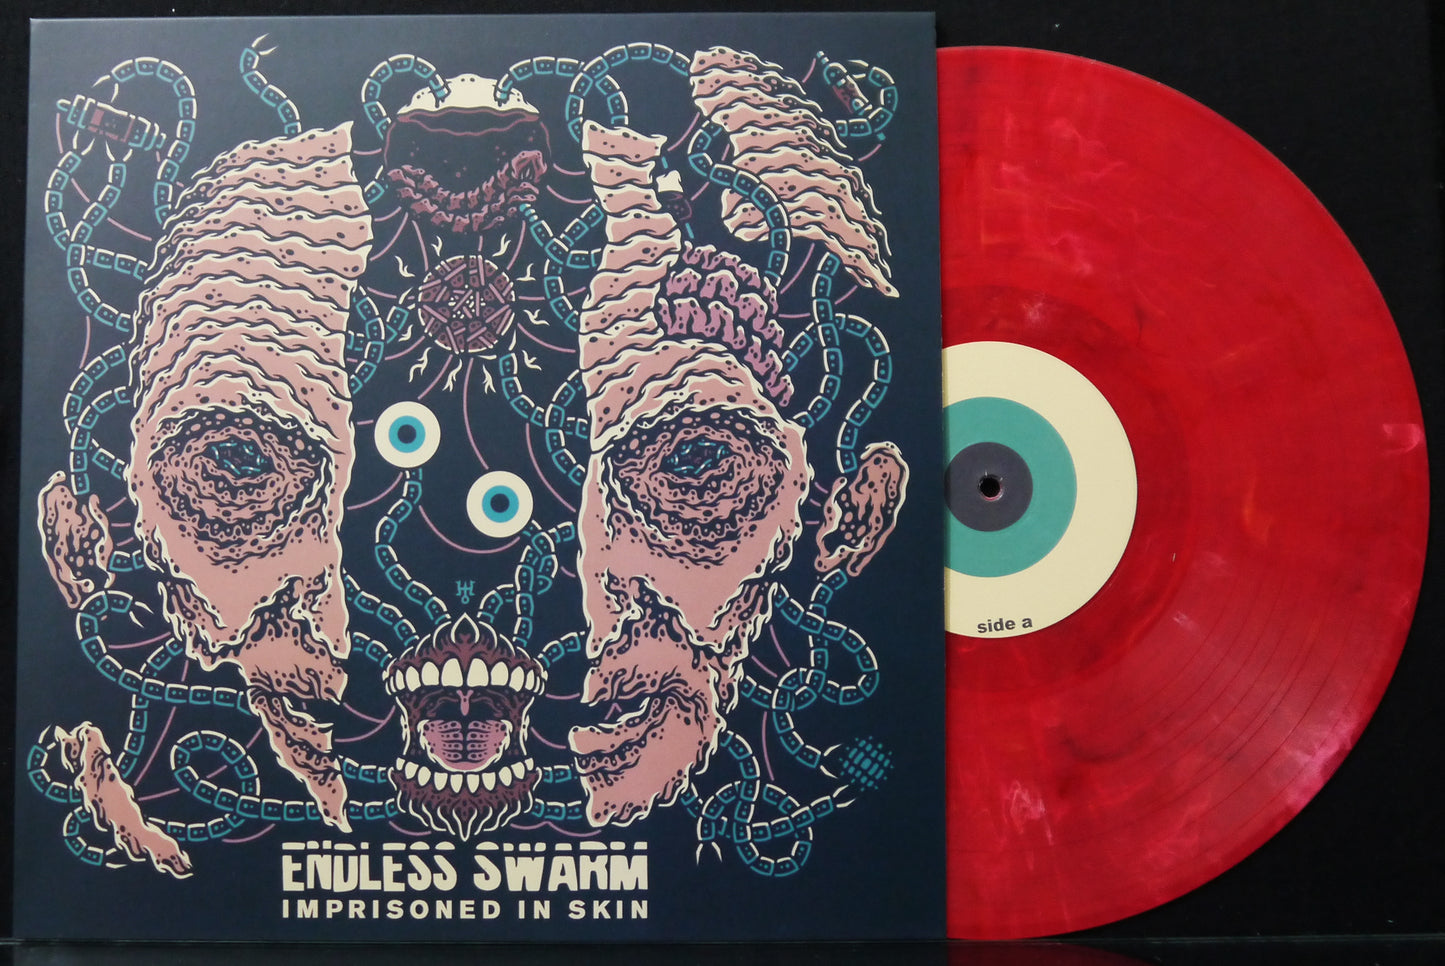 ENDLESS SWARM - Imprisioned In Skin 12"